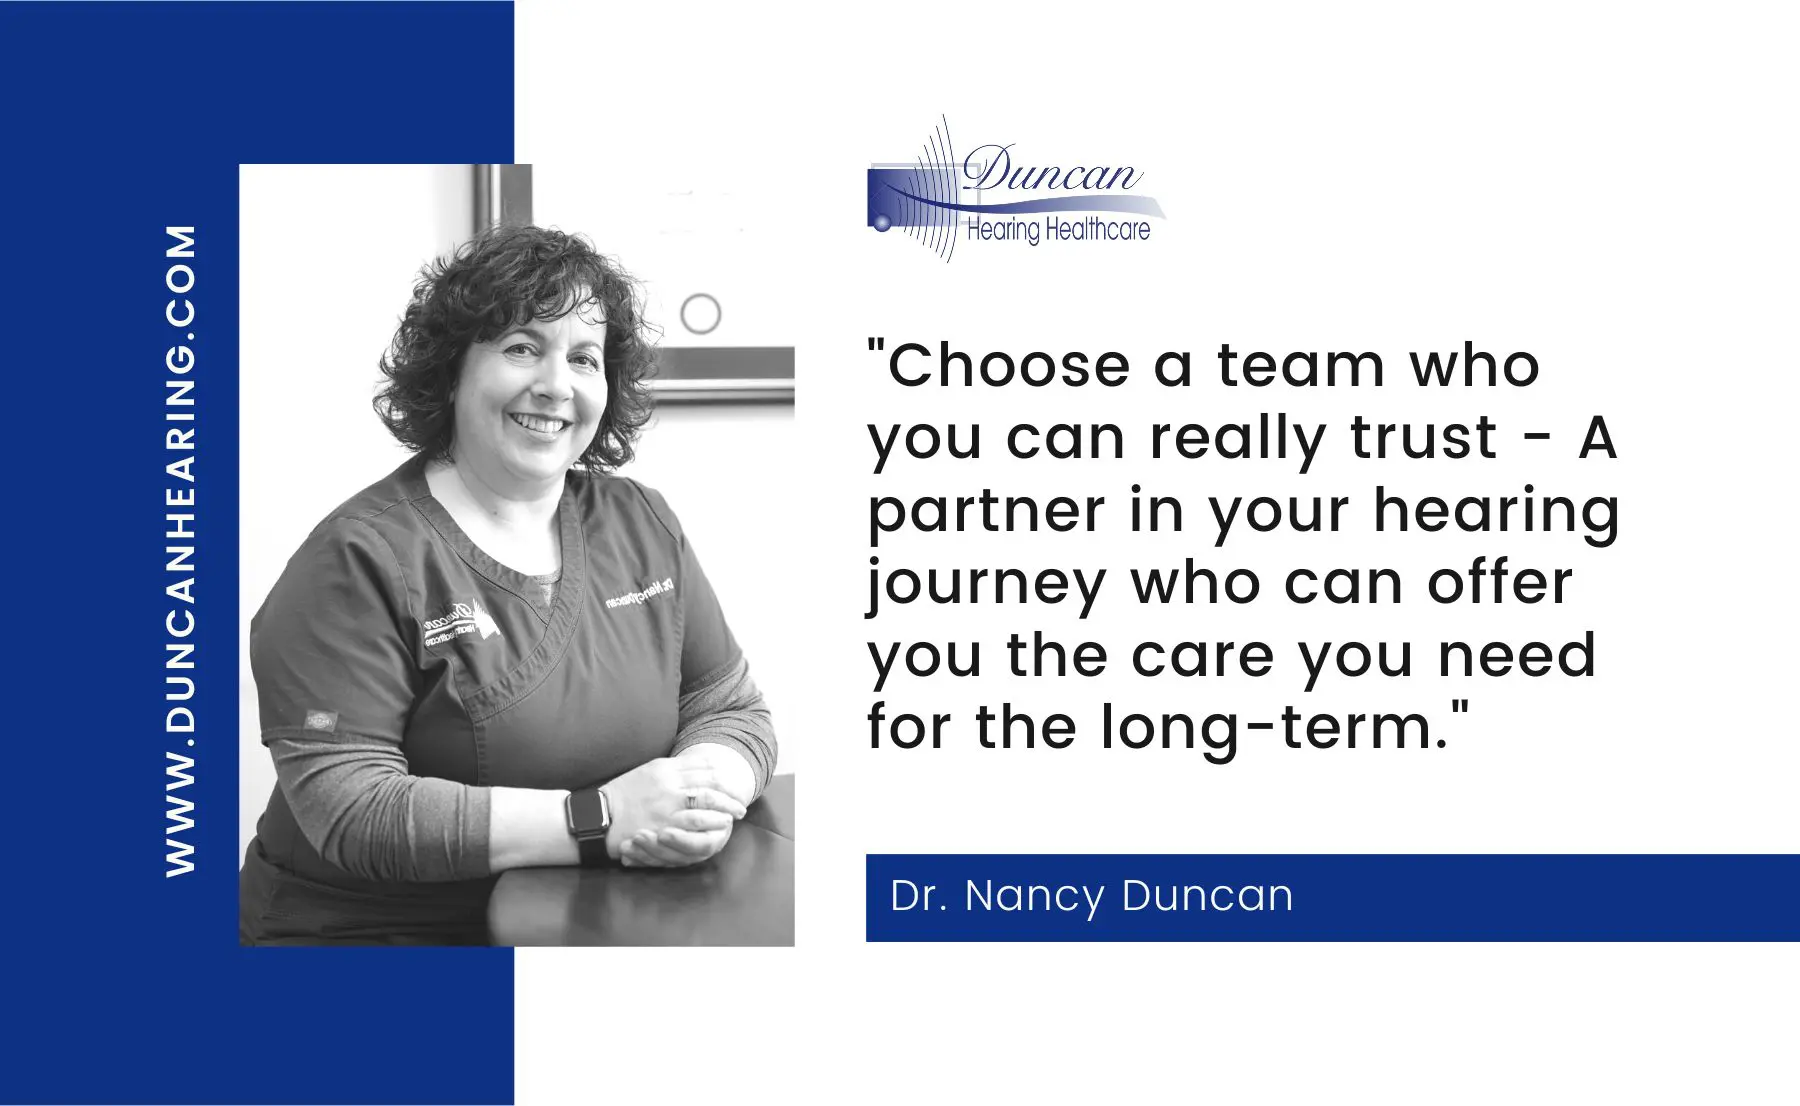 Choose a team who you can really trust - A partner in your hearing journey who can offer you the care you need for the long-term.